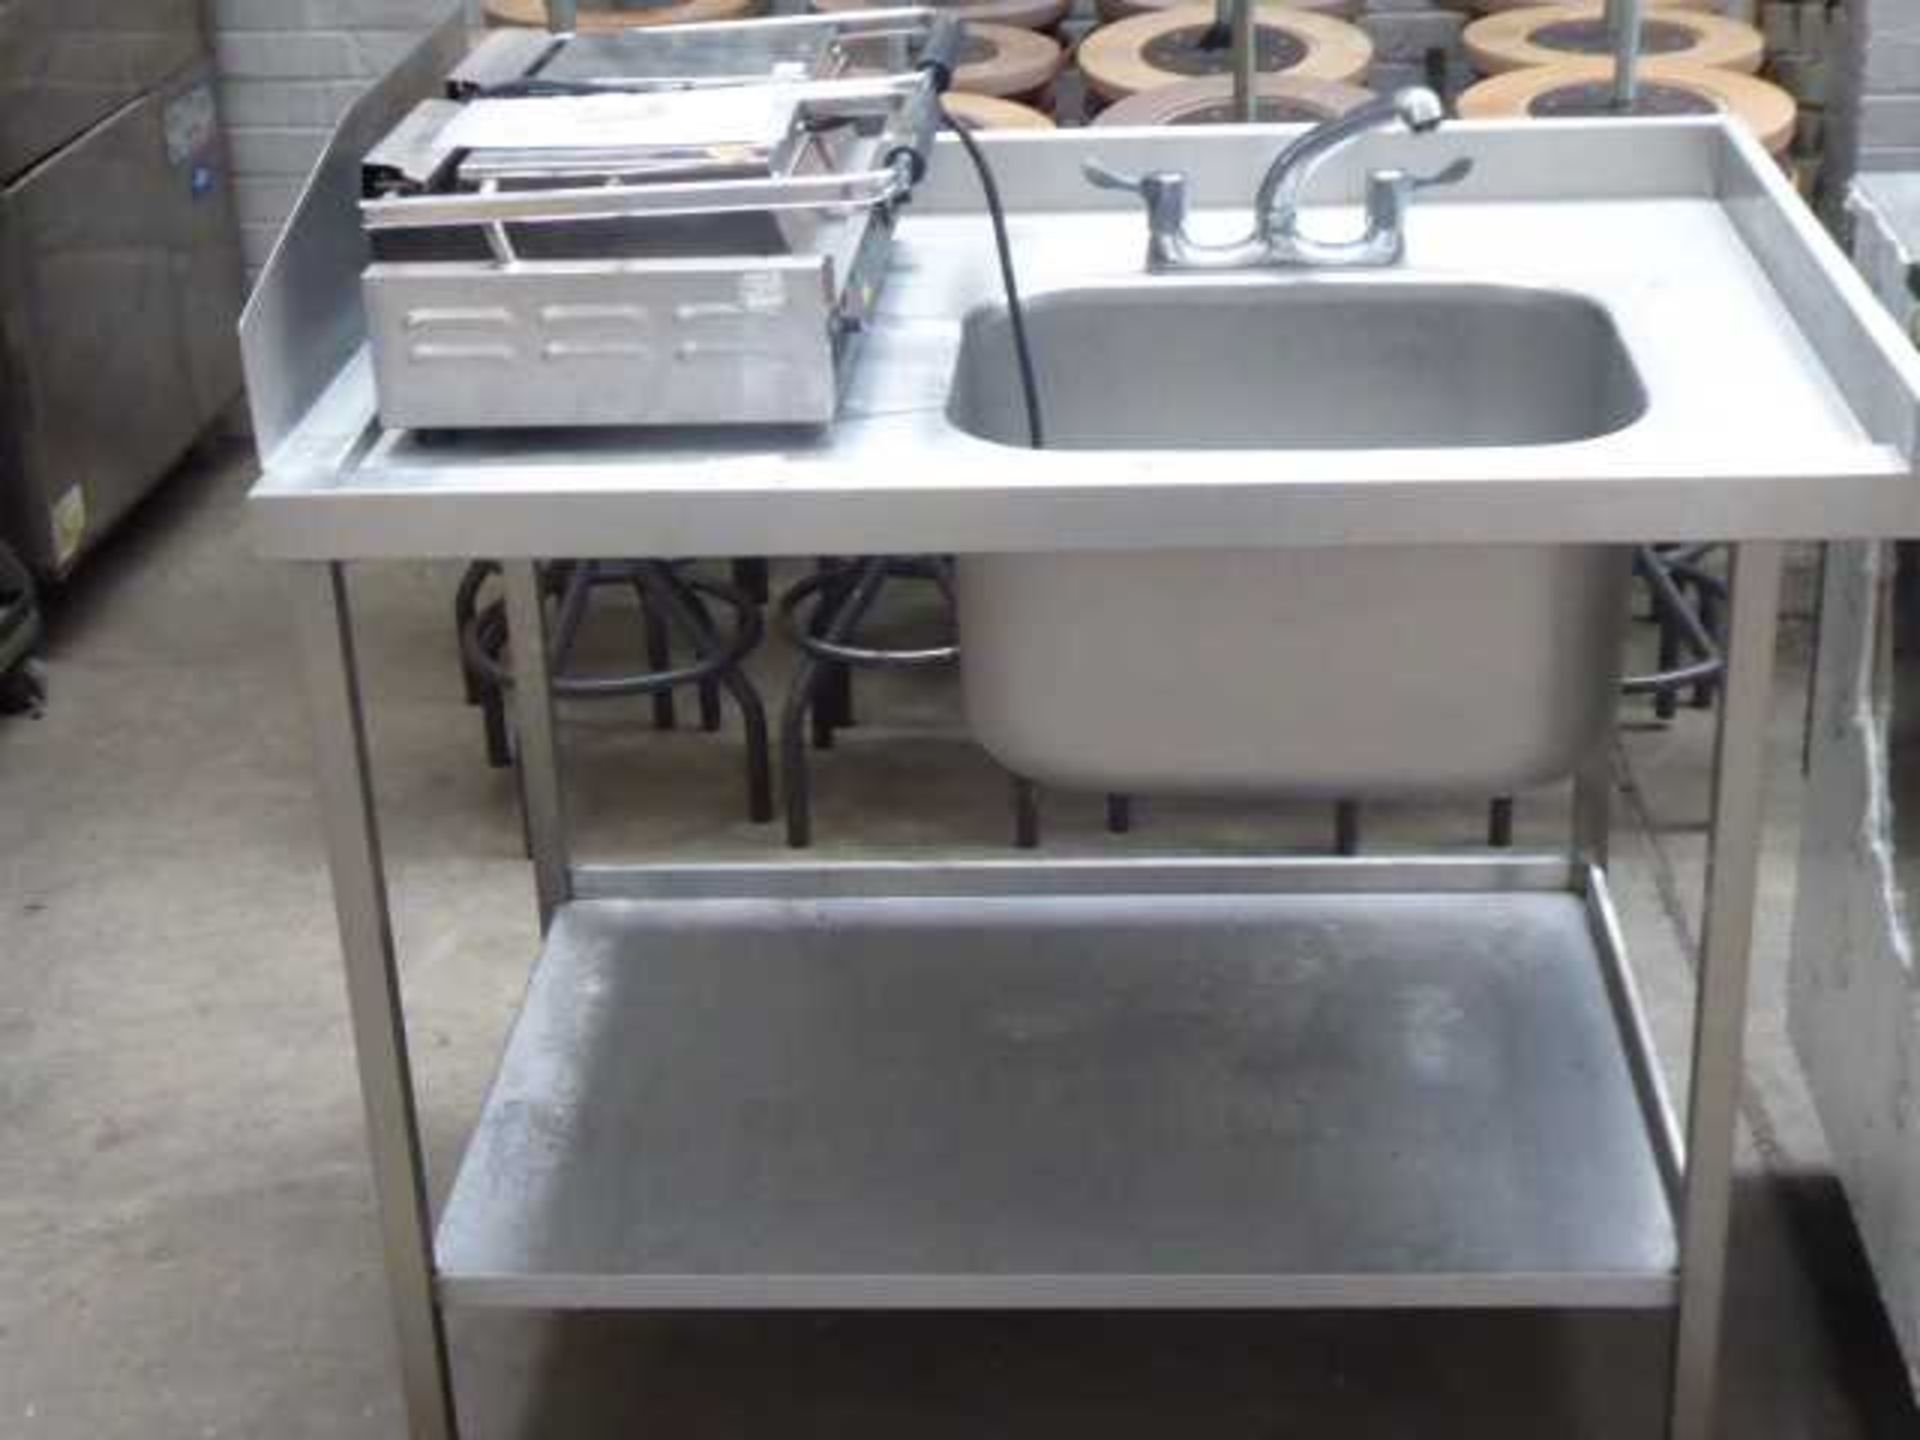 112cm stainless steel sink with draining board, tap set and shelf under - Image 2 of 2